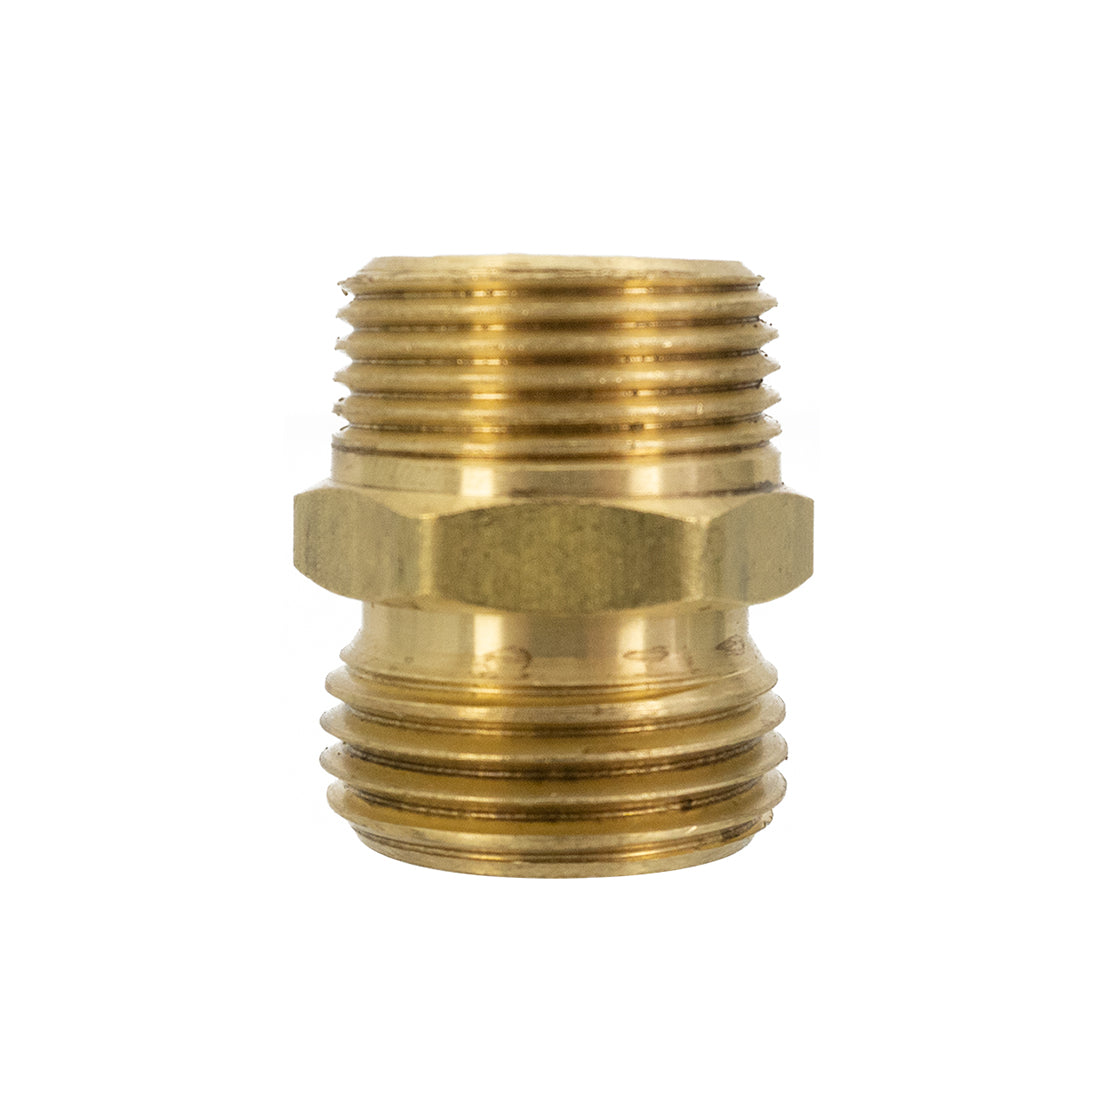 Brass Garden Hose Fitting Adapters 3/4 Male NPT to 3/4 GHT Set